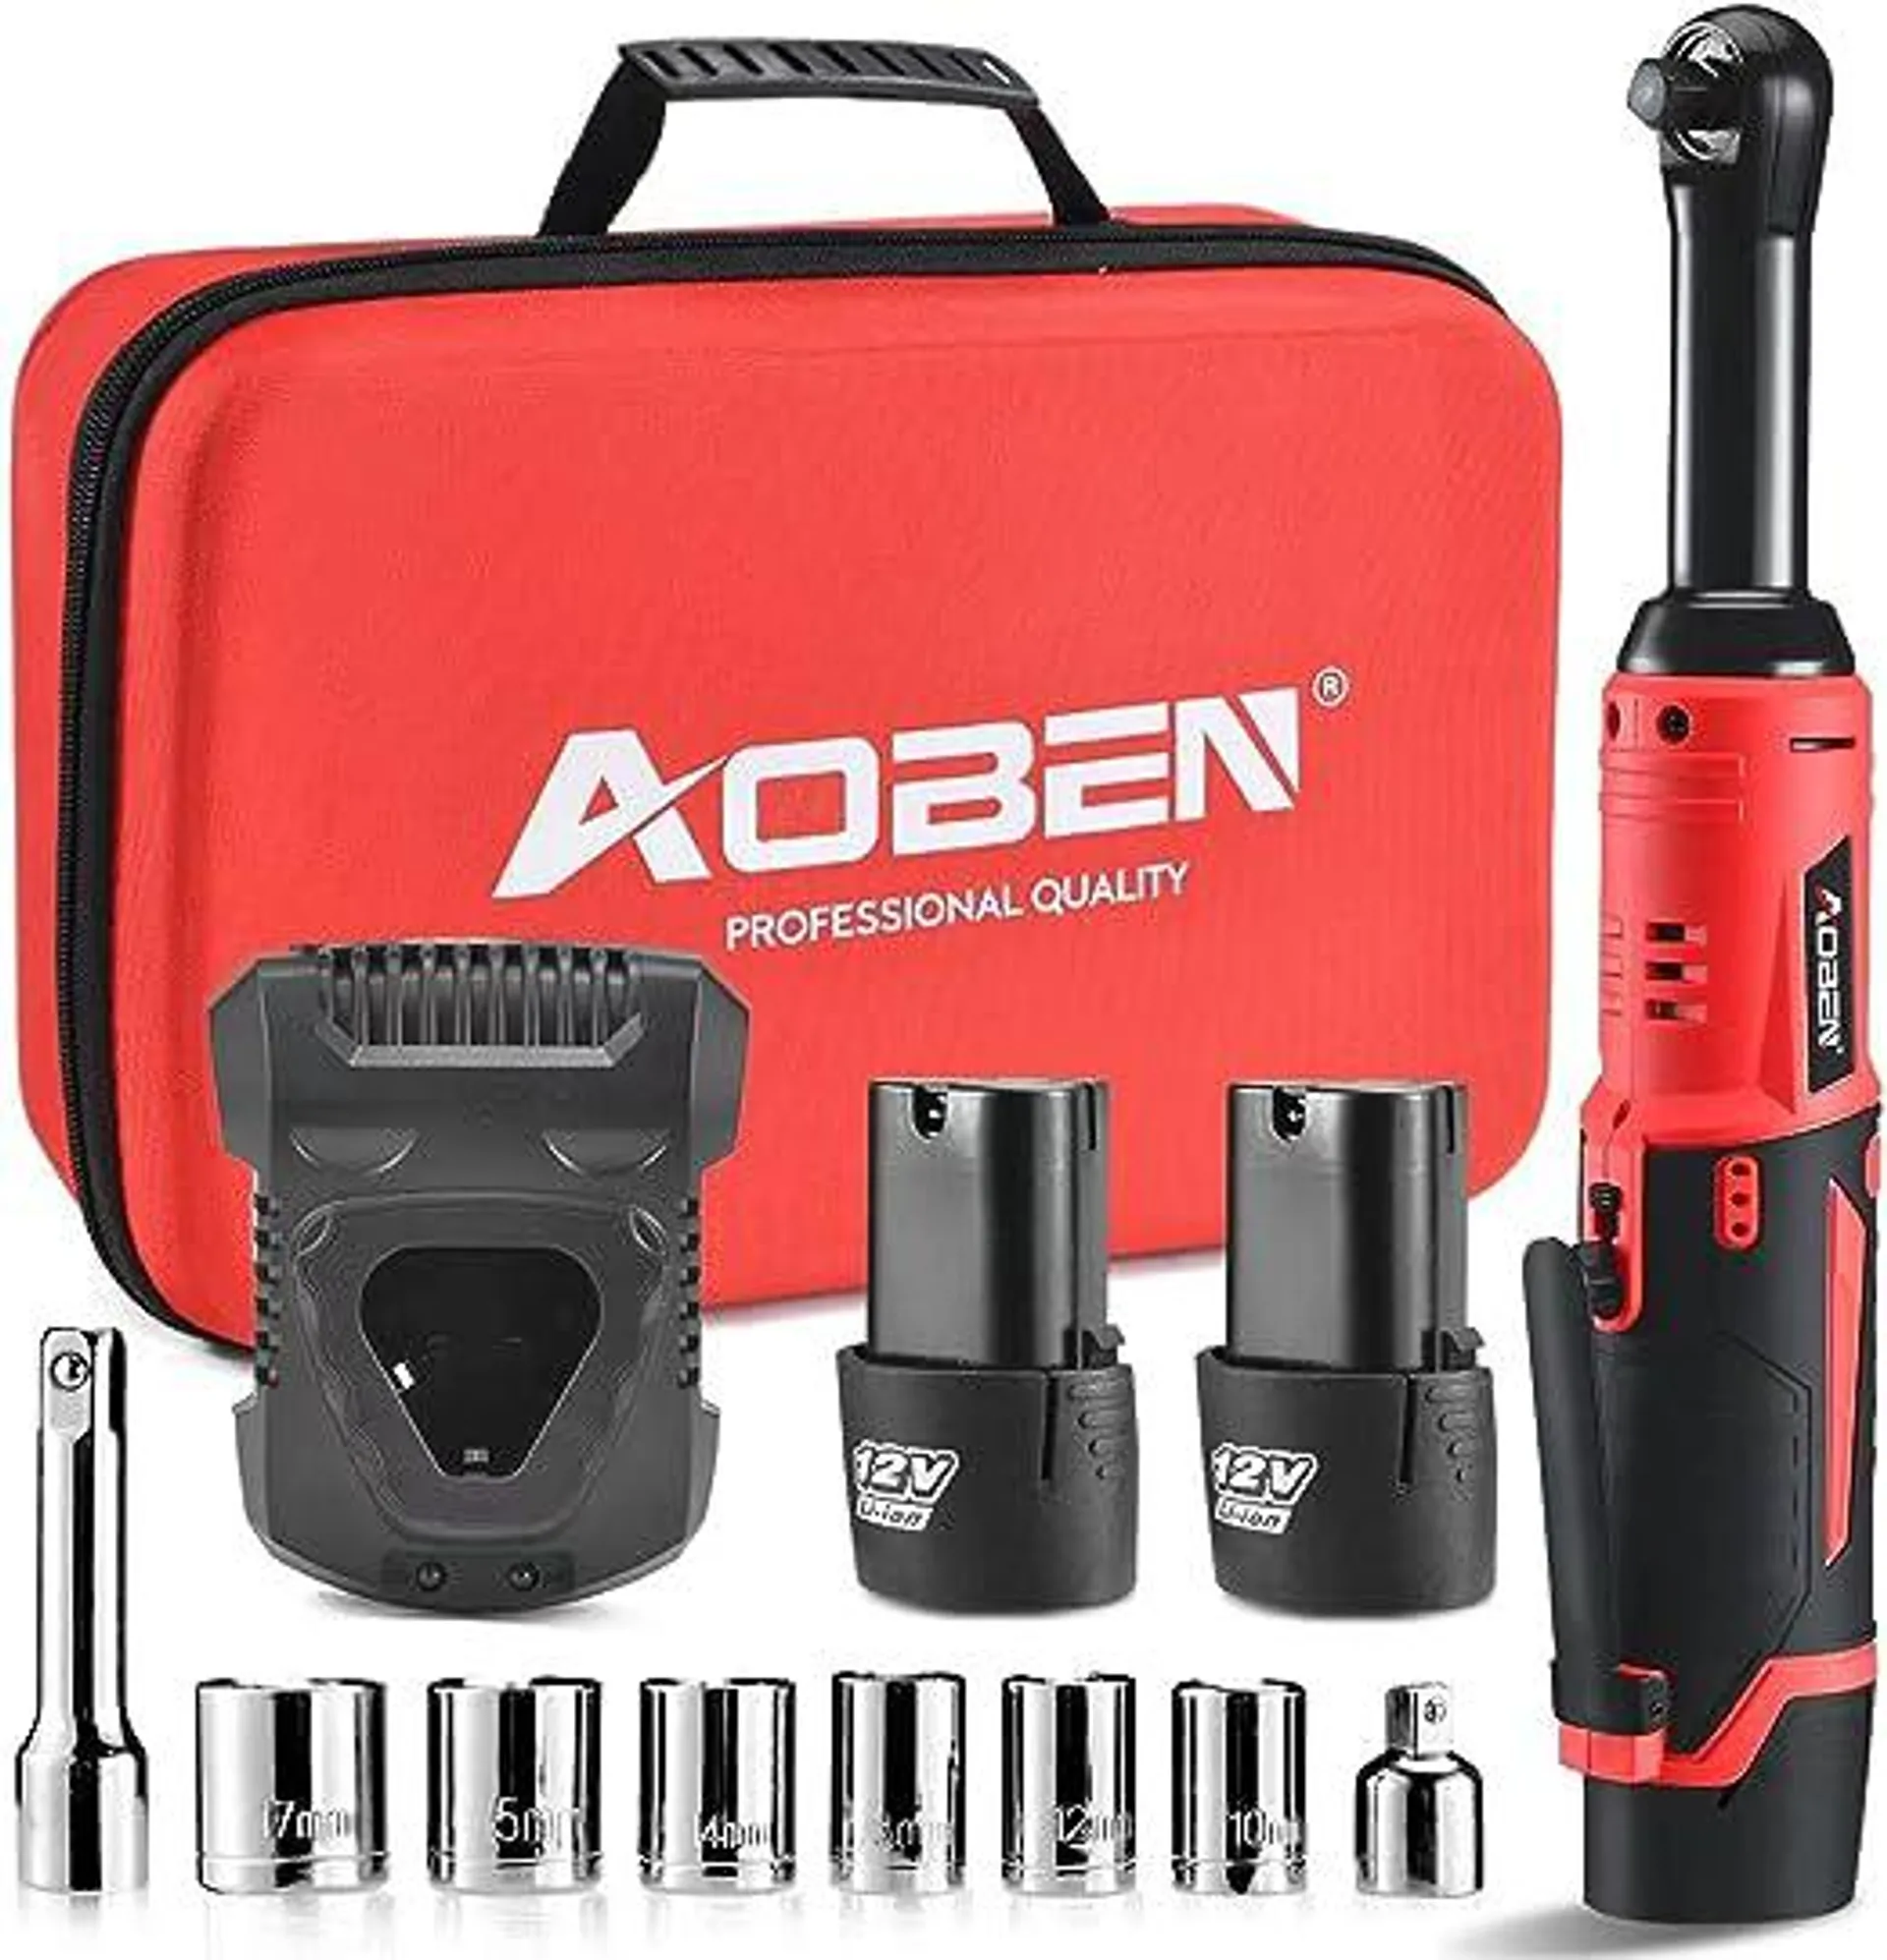 AOBEN Extended Cordless Ratchet Wrench Kit, 4.7" Long Reach 3/8" ratchet,40 Ft-lbs Electric Power Ratchet Set with Variable Speed Trigger,2 Packs 2000mAh Lithium-Ion Battery And Charger,8 Sockets